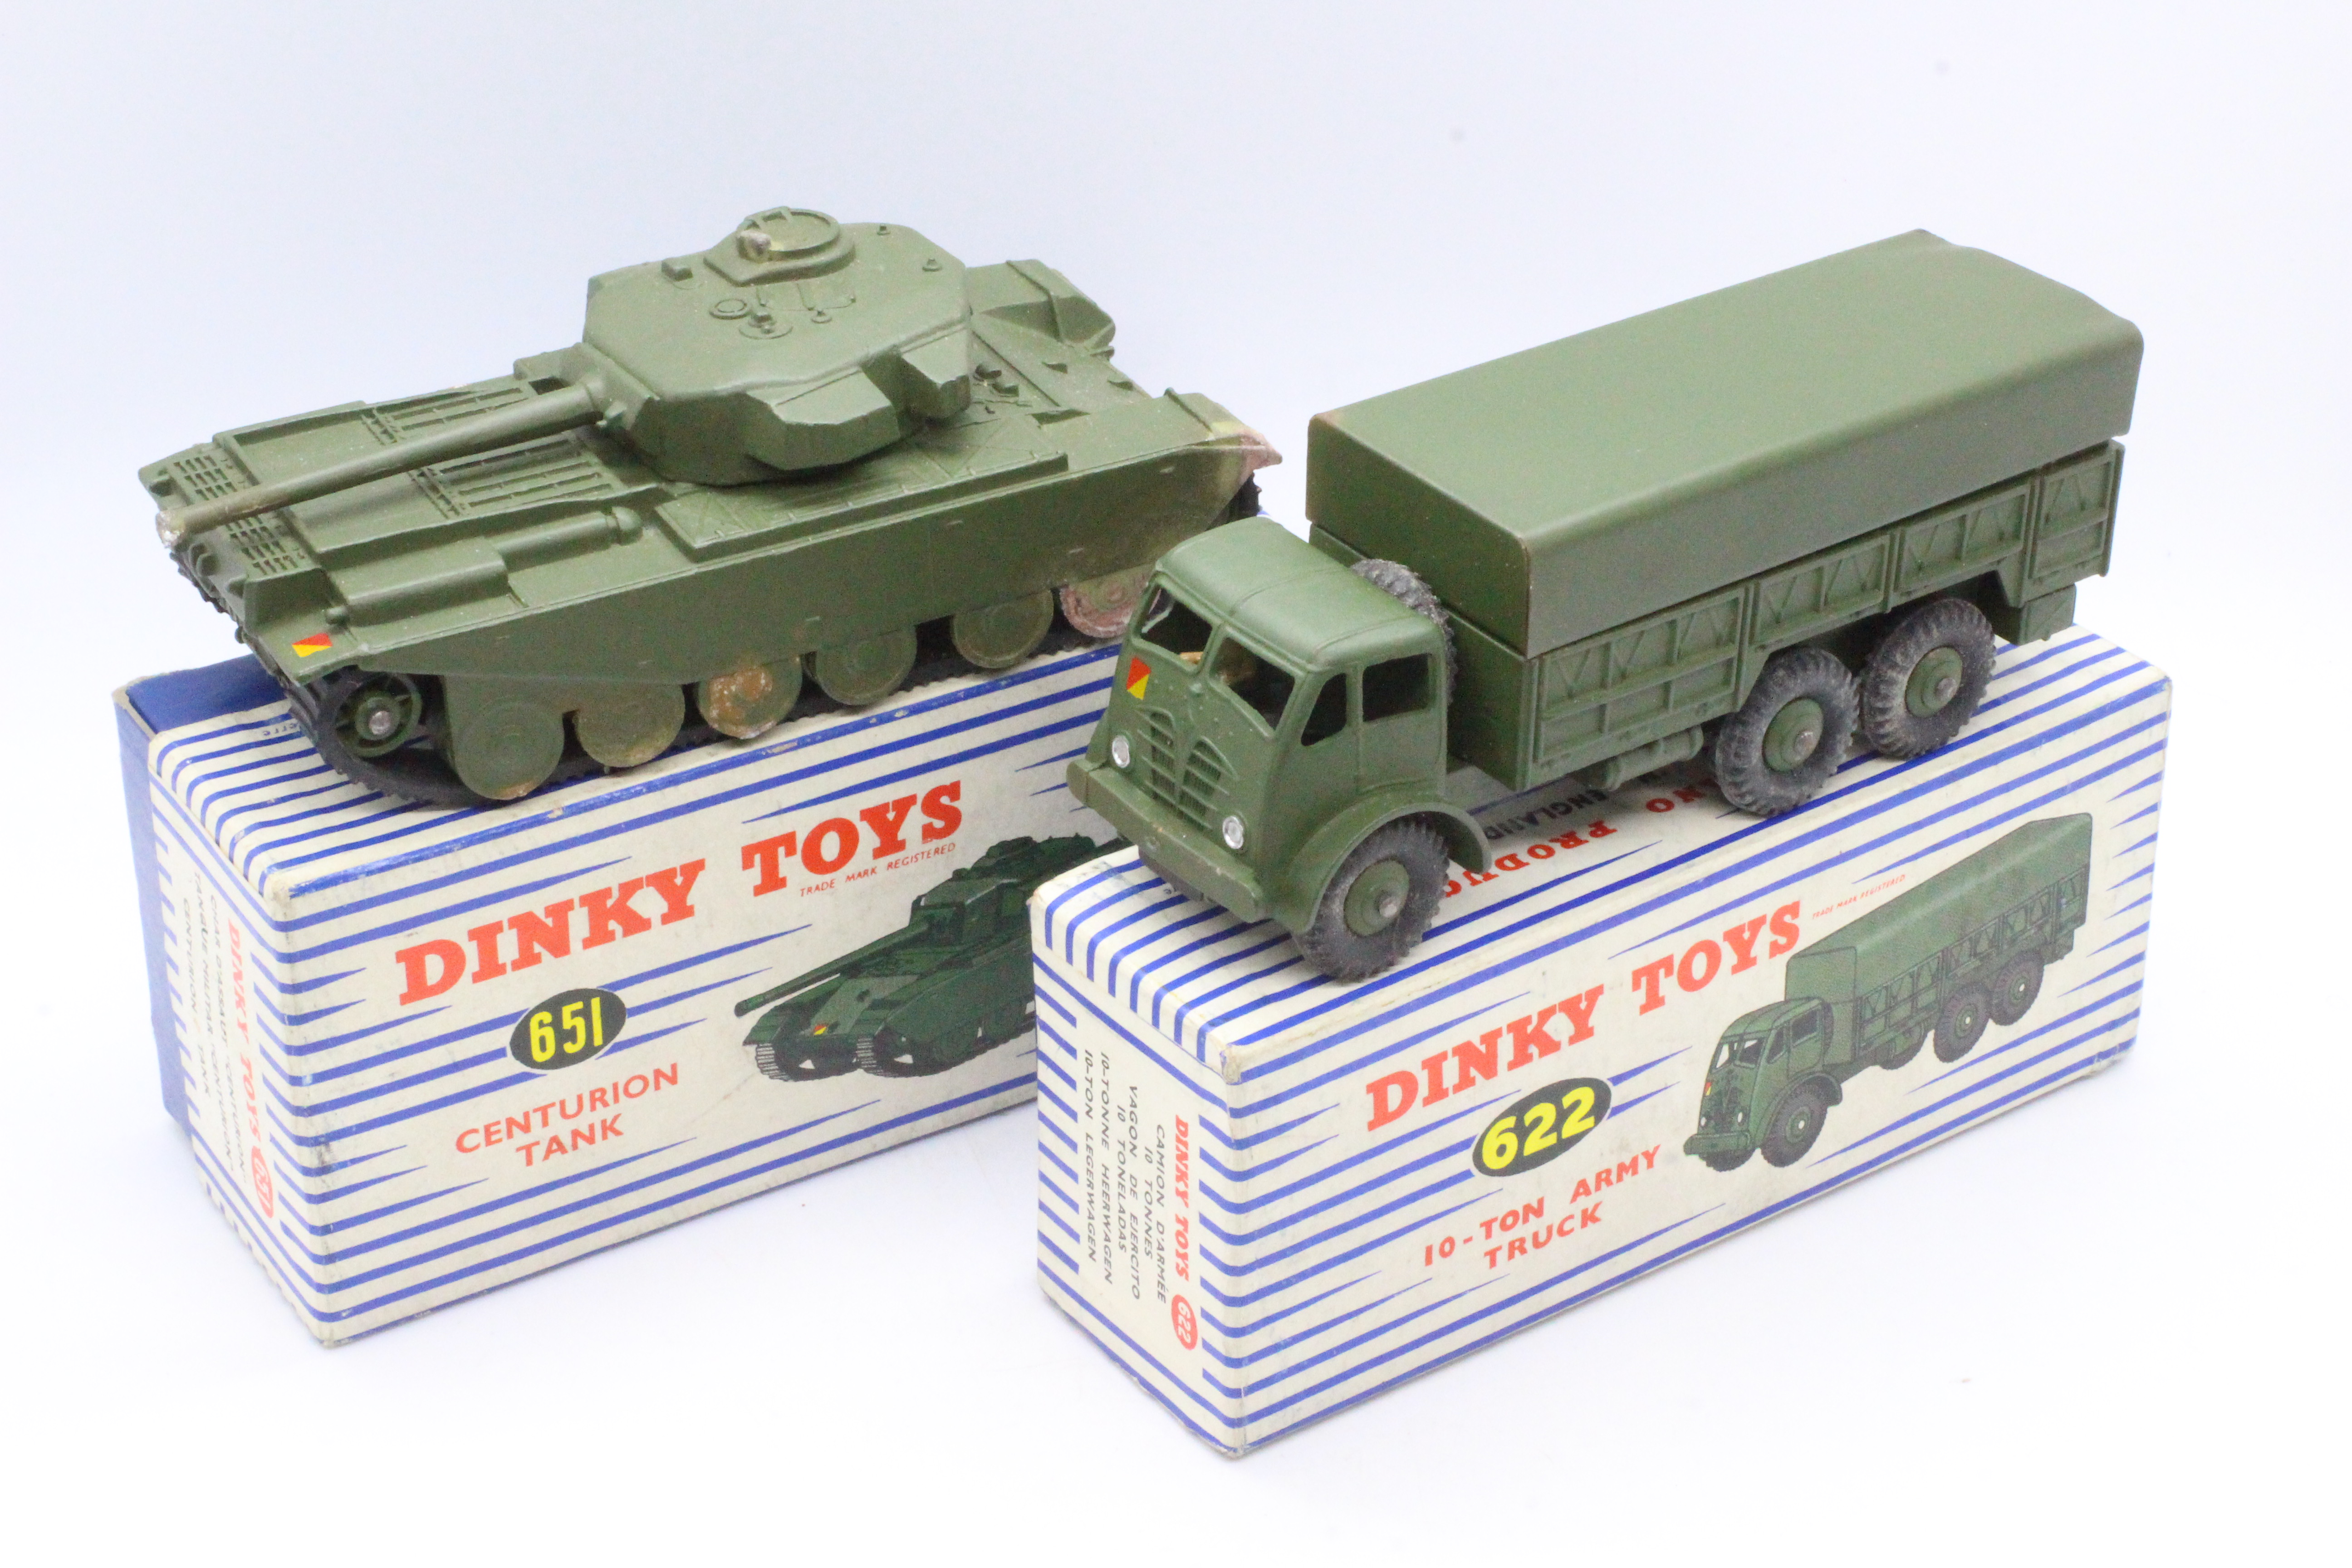 Dinky - 2 x boxed Military models, a Centurion Tank # 651 and a 10 - Ton Army Truck # 622.